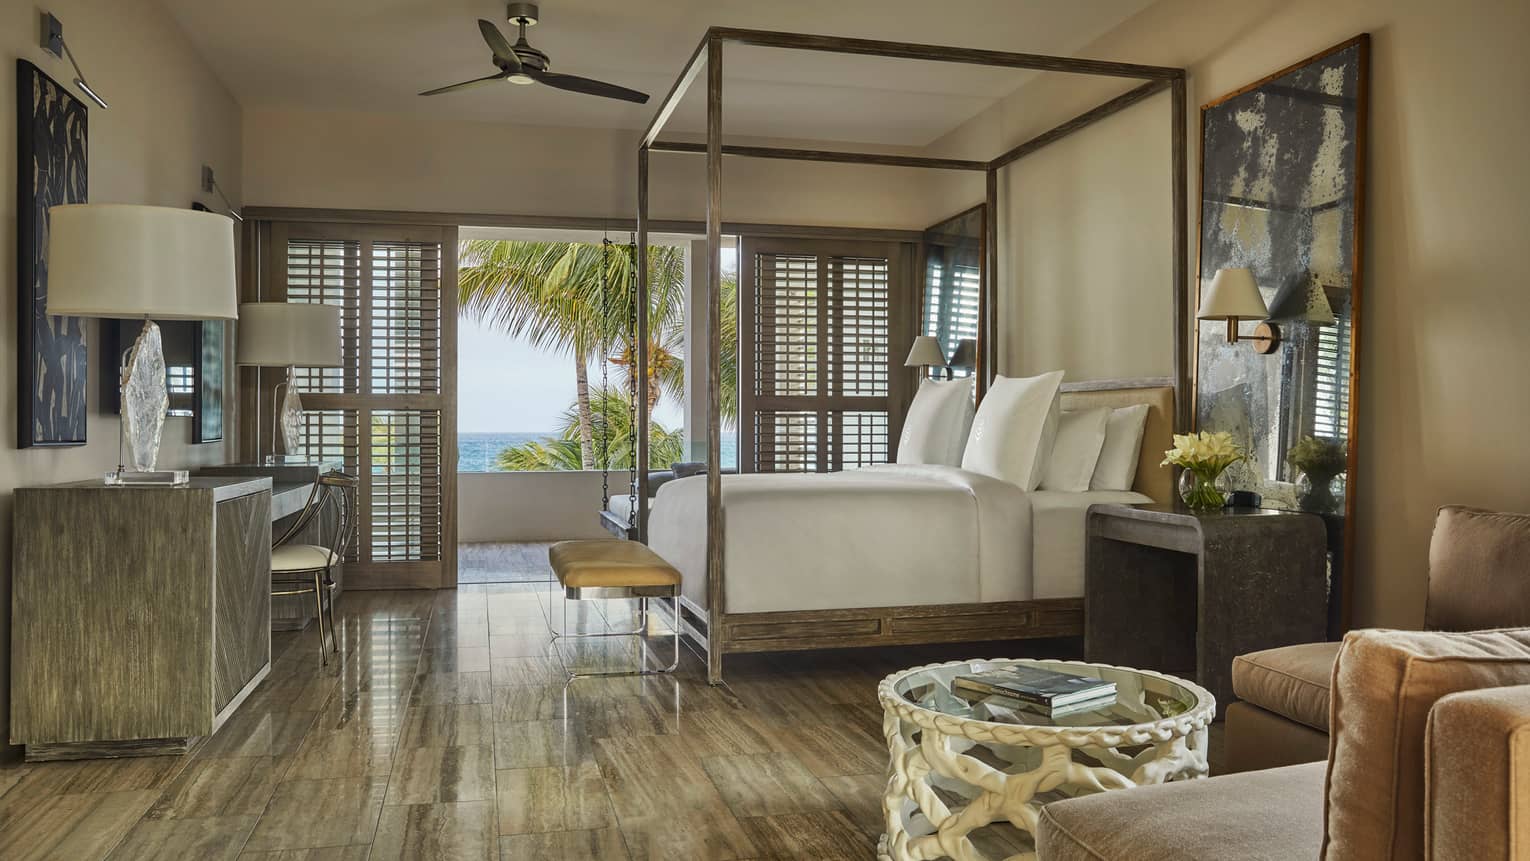 Three-Bedroom Beachfront Villa view from L-shaped sofa to canopy bed, tables with lamps, open patio shutters